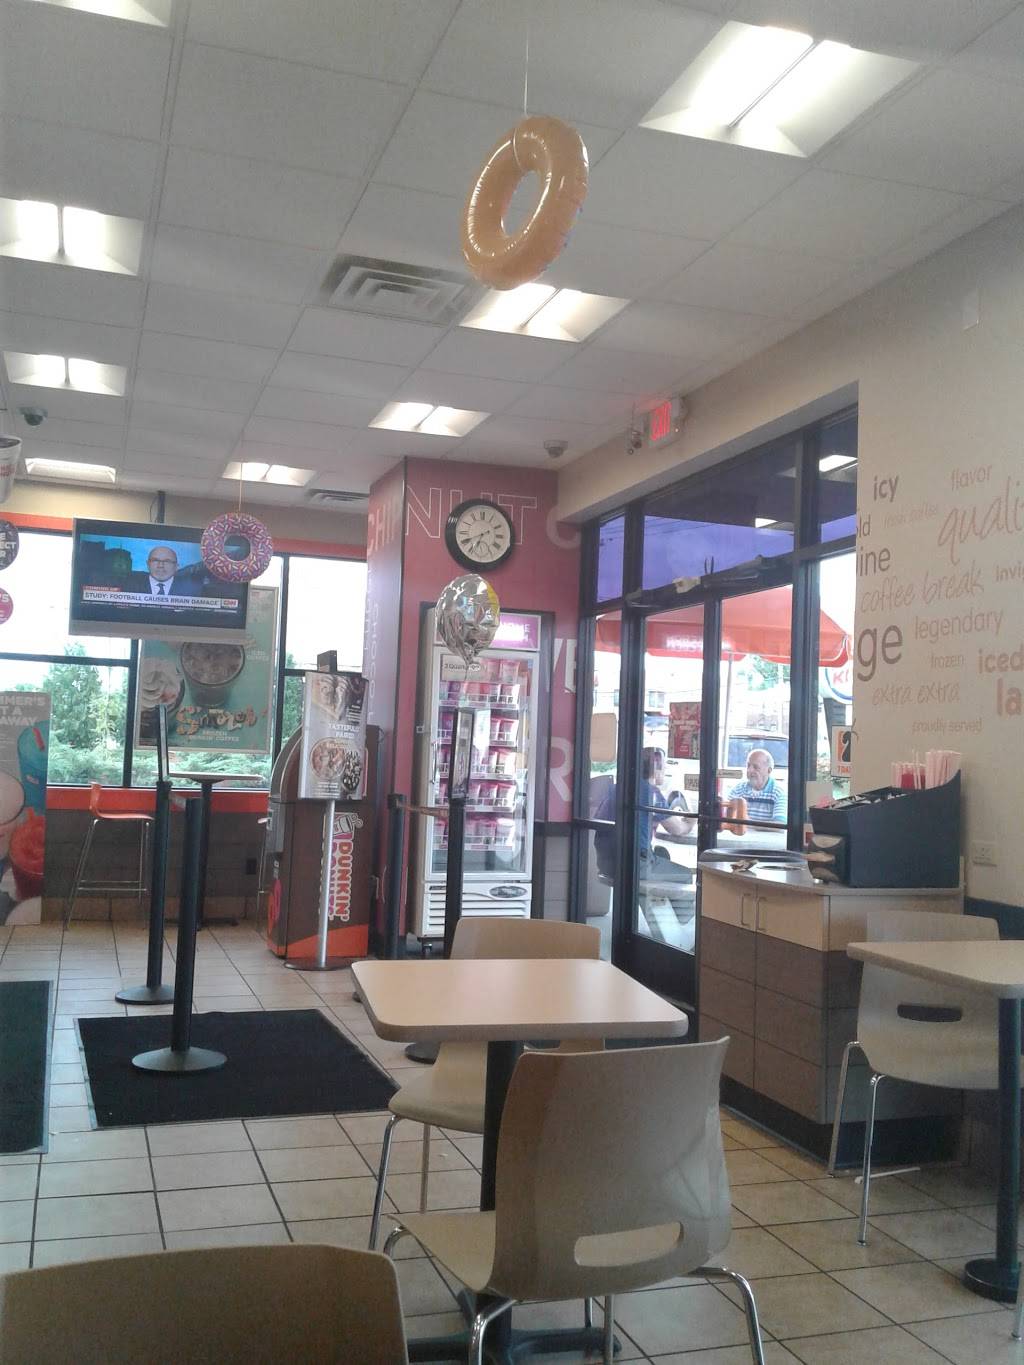 Dunkin Donuts | cafe | 7401 Tonnelle Ave, North Bergen, NJ 07047, USA | 2018685265 OR +1 201-868-5265